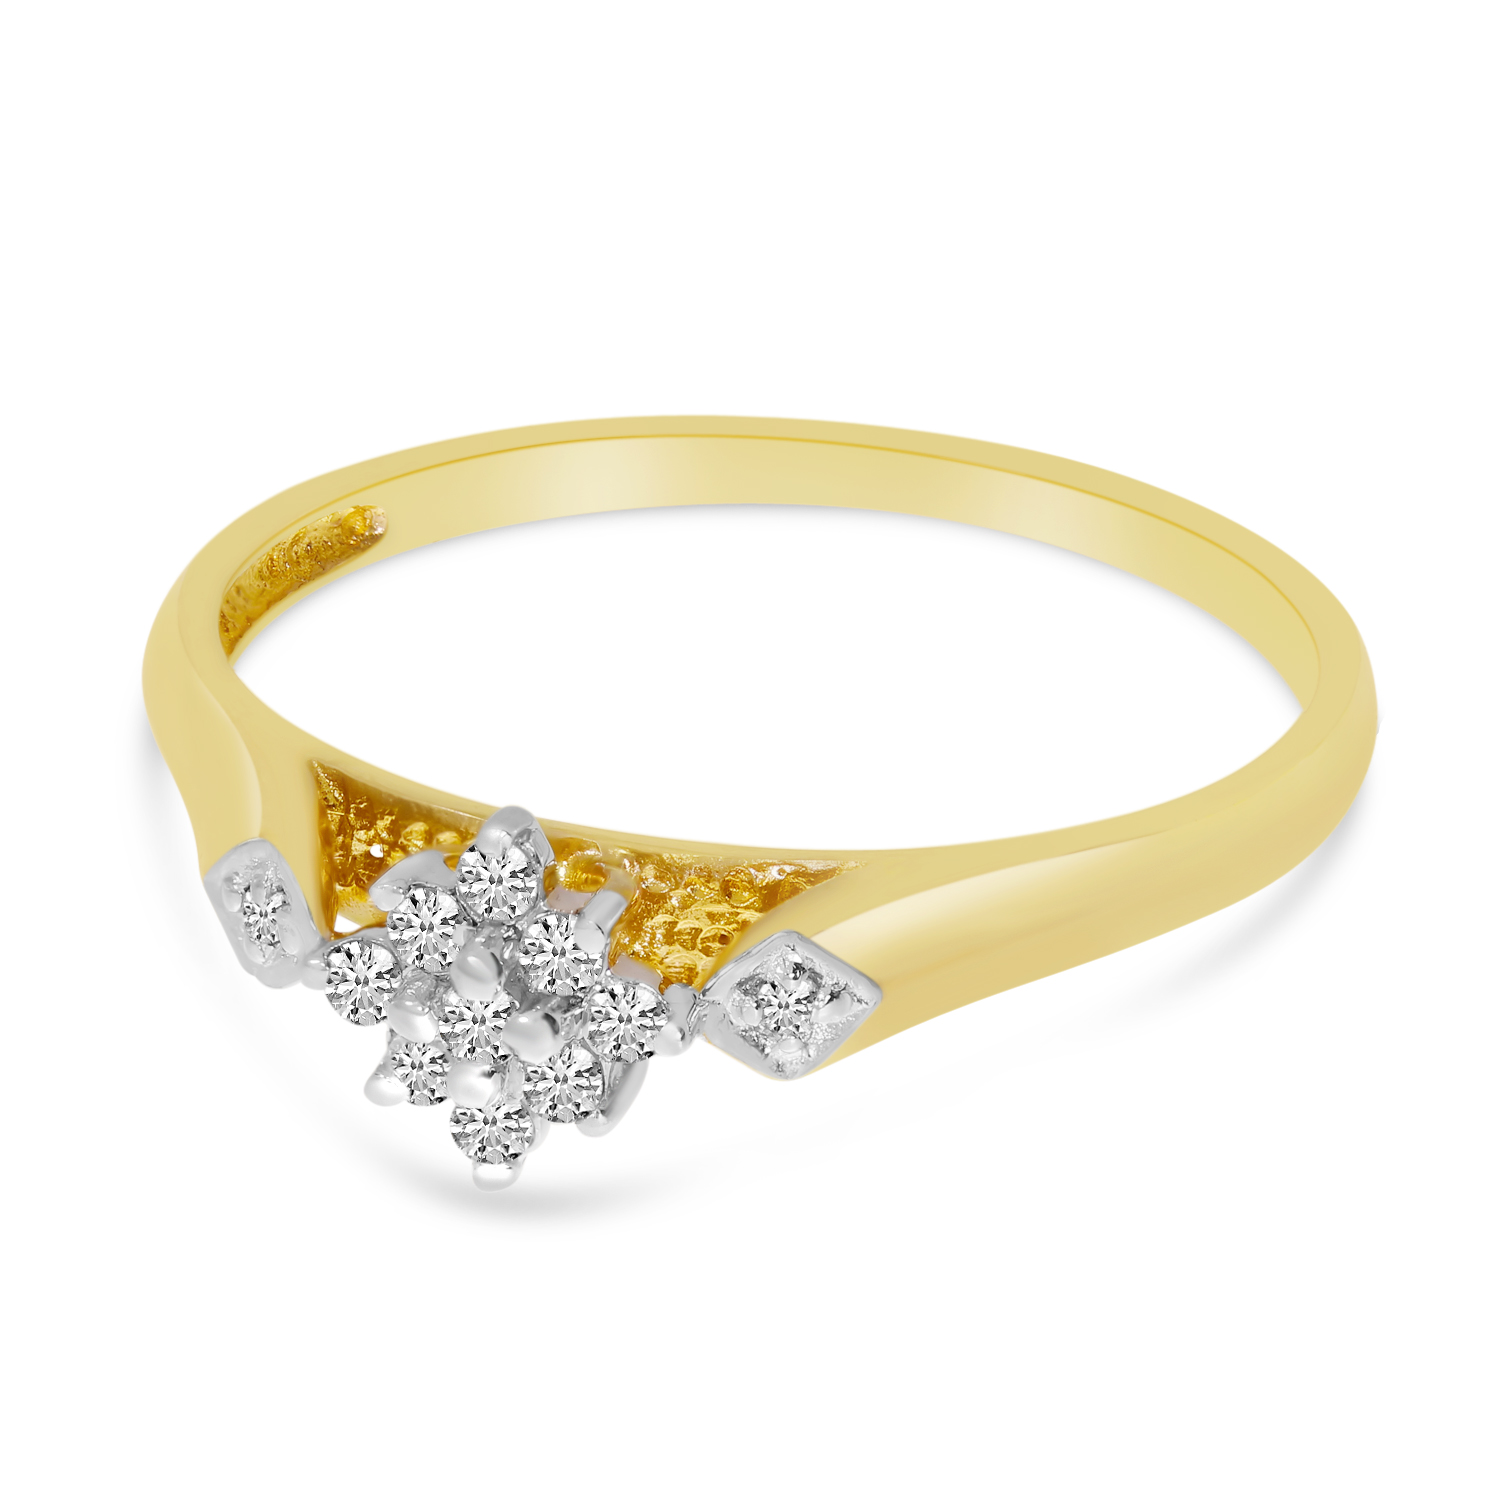 Direct-Jewelry 14K Yellow Gold Diamond Cluster Ring